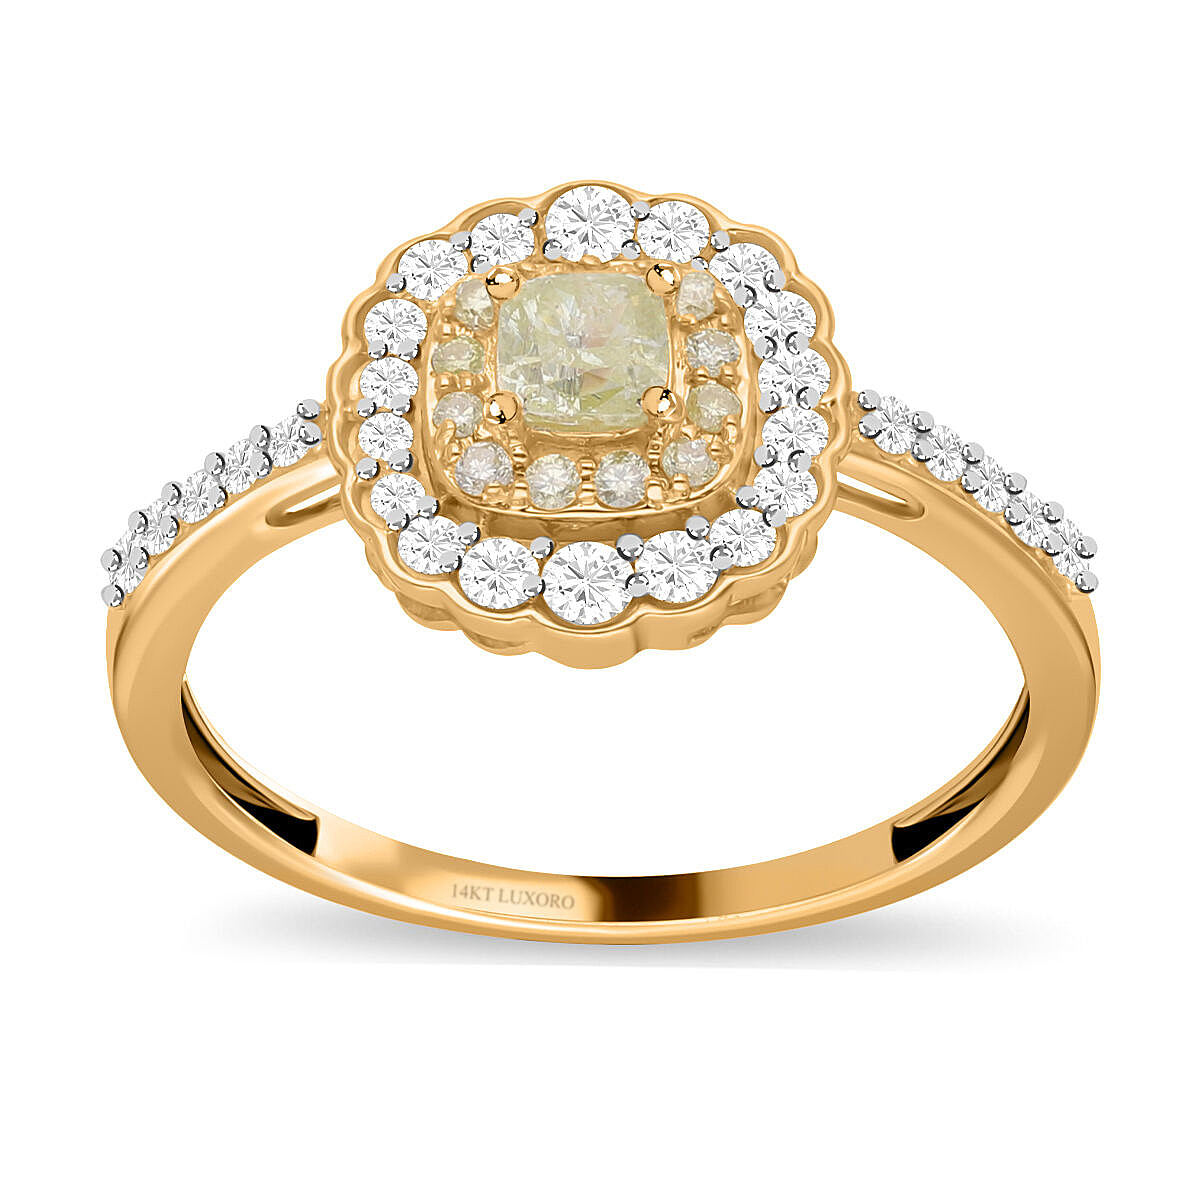 SGL Certified Natural Yellow Diamond (I1-I2) and White Diamond (I1/I2-G/H) Ring in 14K Yellow Gold 1.01 Ct